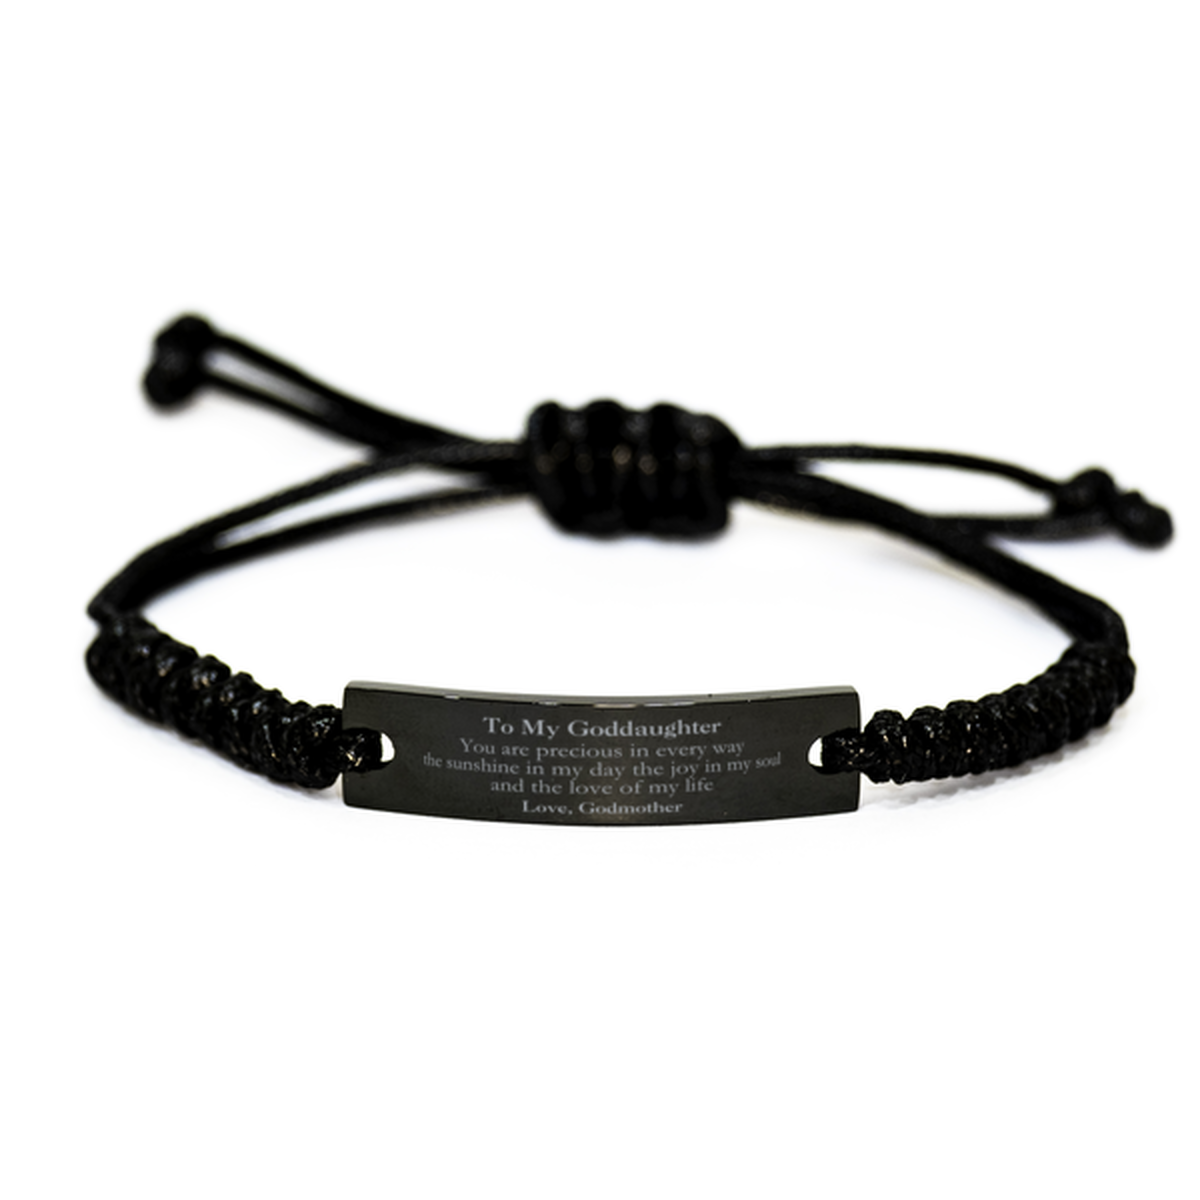 Graduation Gifts for Goddaughter Black Rope Bracelet Present from Godmother, Christmas Goddaughter Birthday Gifts Goddaughter You are precious in every way the sunshine in my day. Love, Godmother